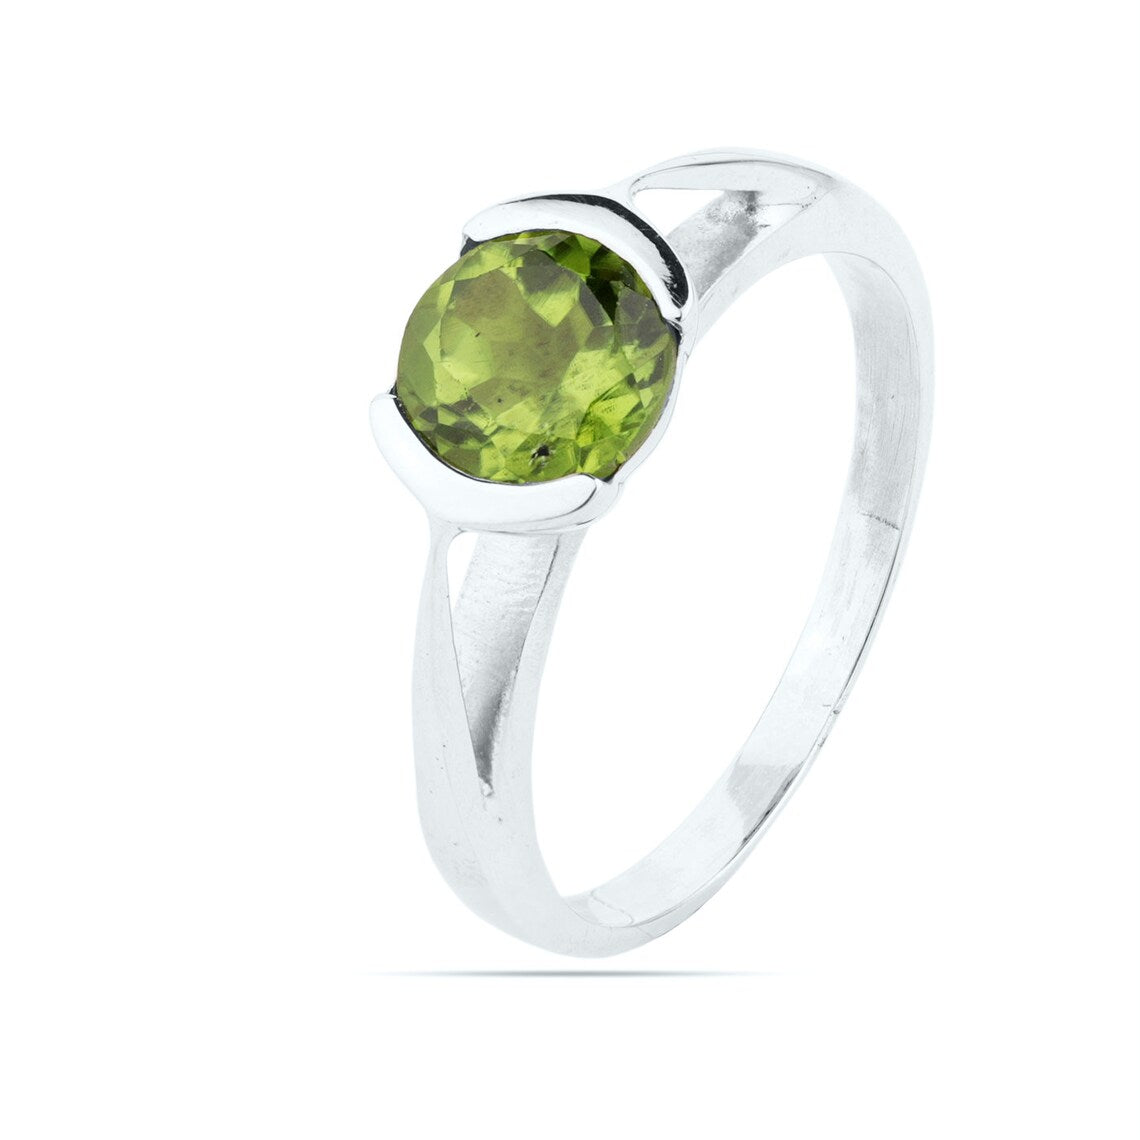 Round Peridot Ring, Peridot Engagement Ring, August Birthstone Ring, Green Stone Ring, Promise Ring Peridot Stacking Ring Gemstone Ring